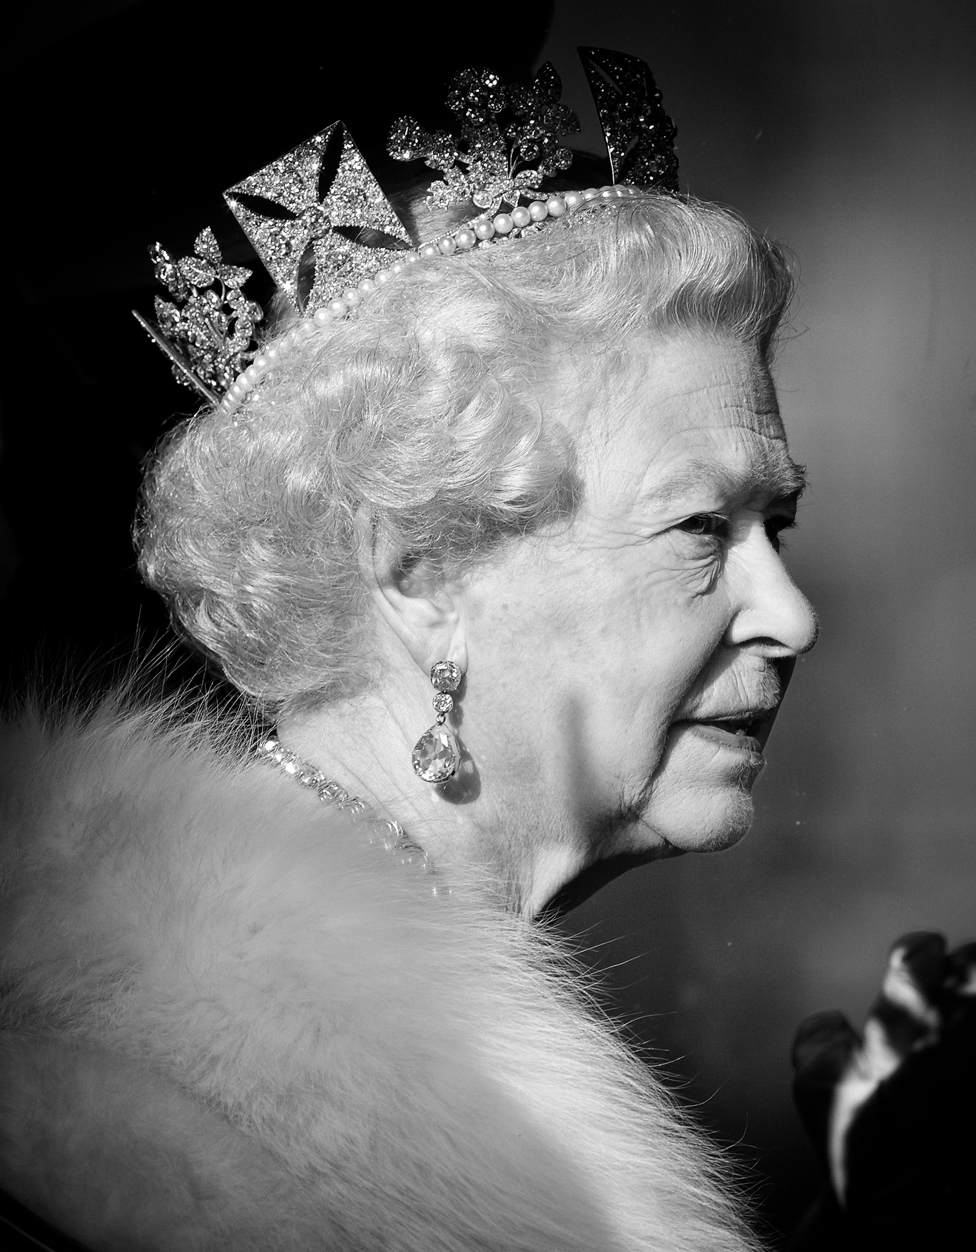 The Queen travels down The Mall to attend the State Opening of Parliament on 15 November 2006 in London, England.